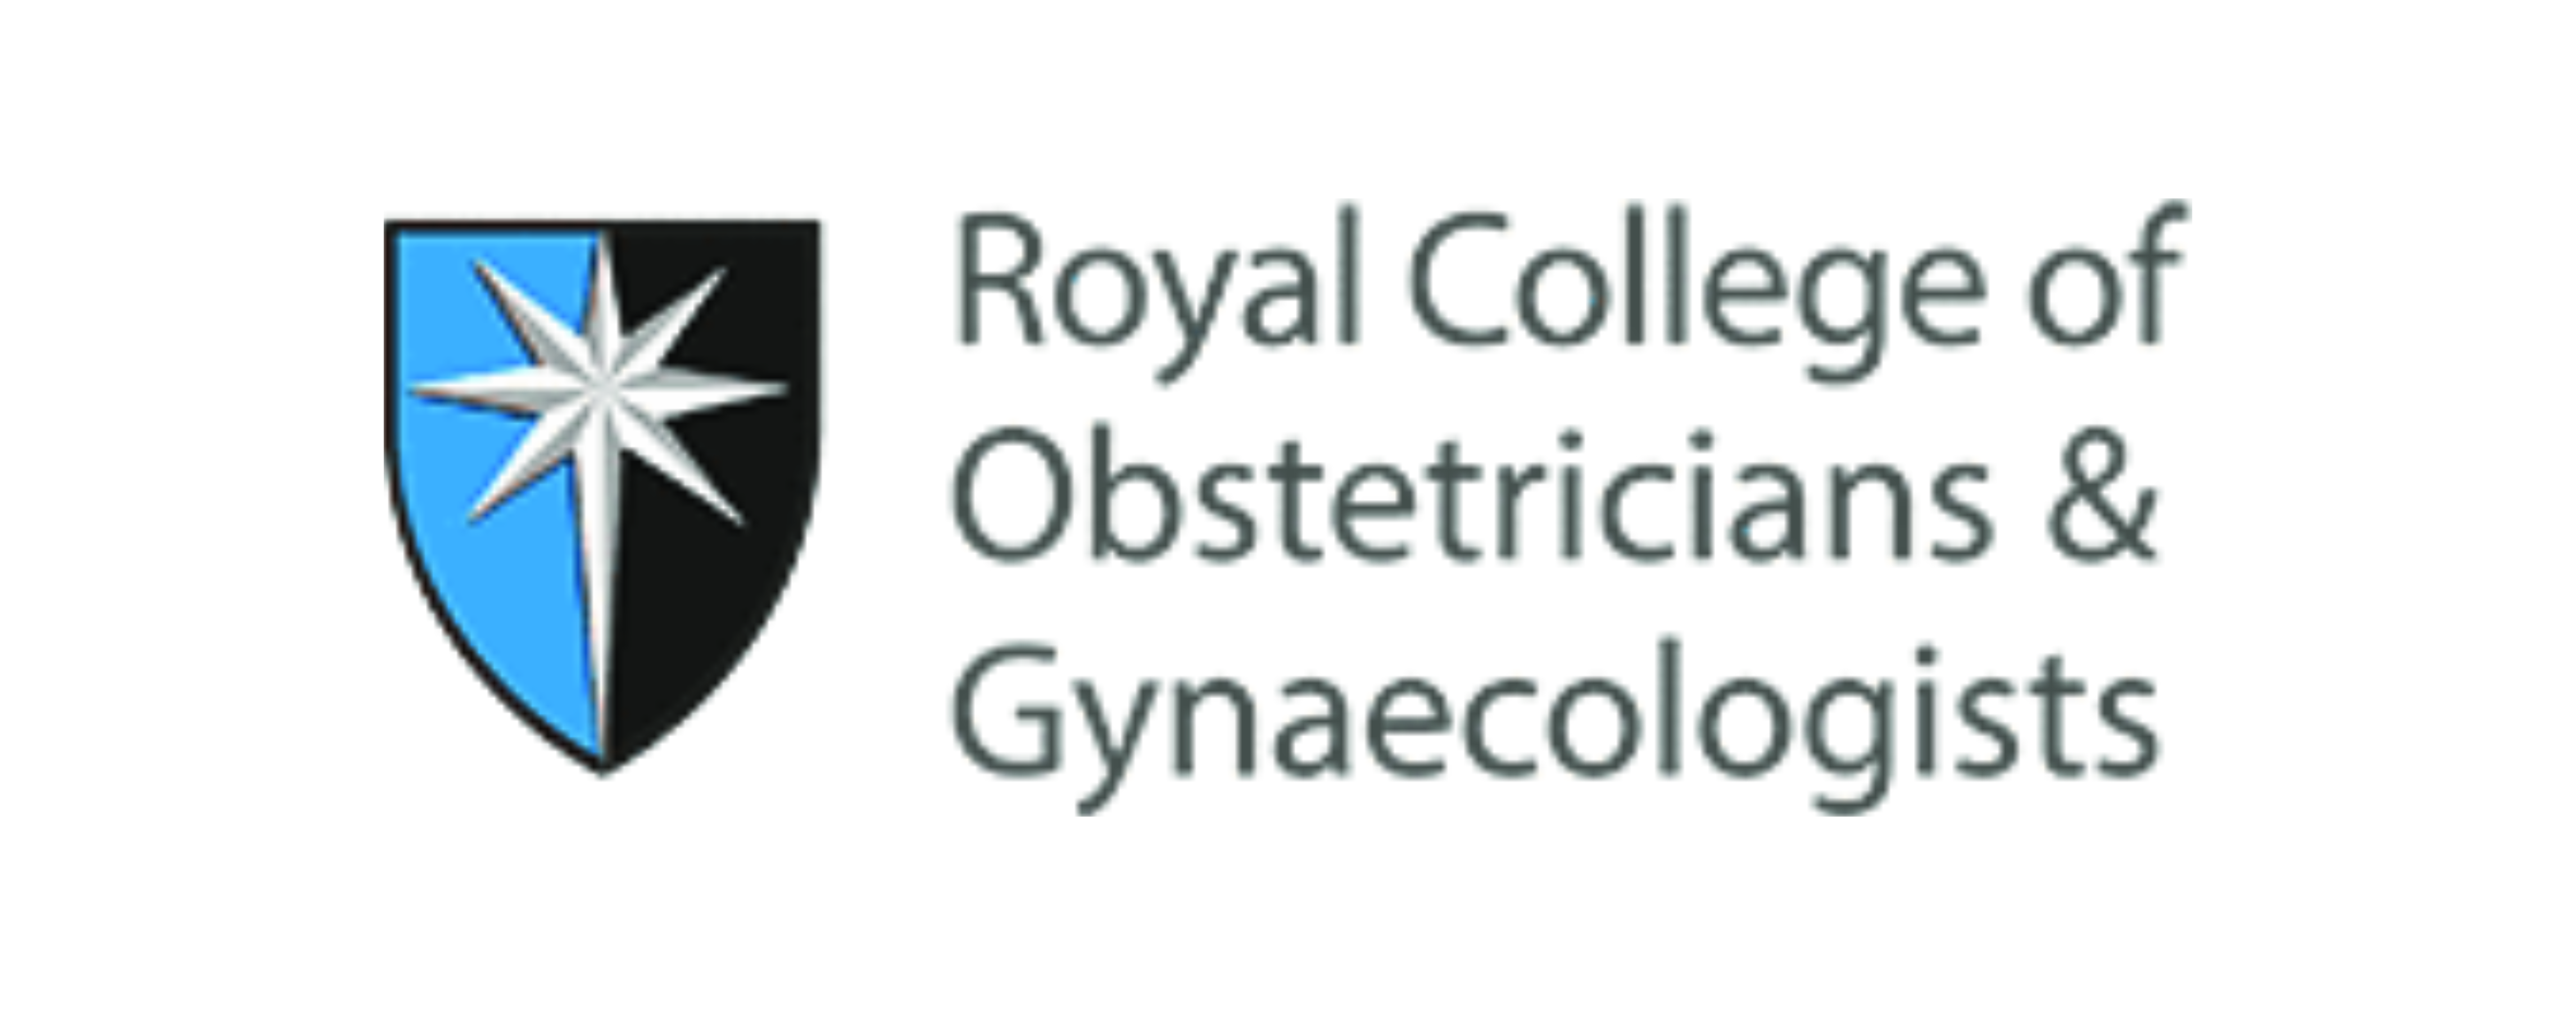 Royal College of Obstetricians and Gynaecologists logo